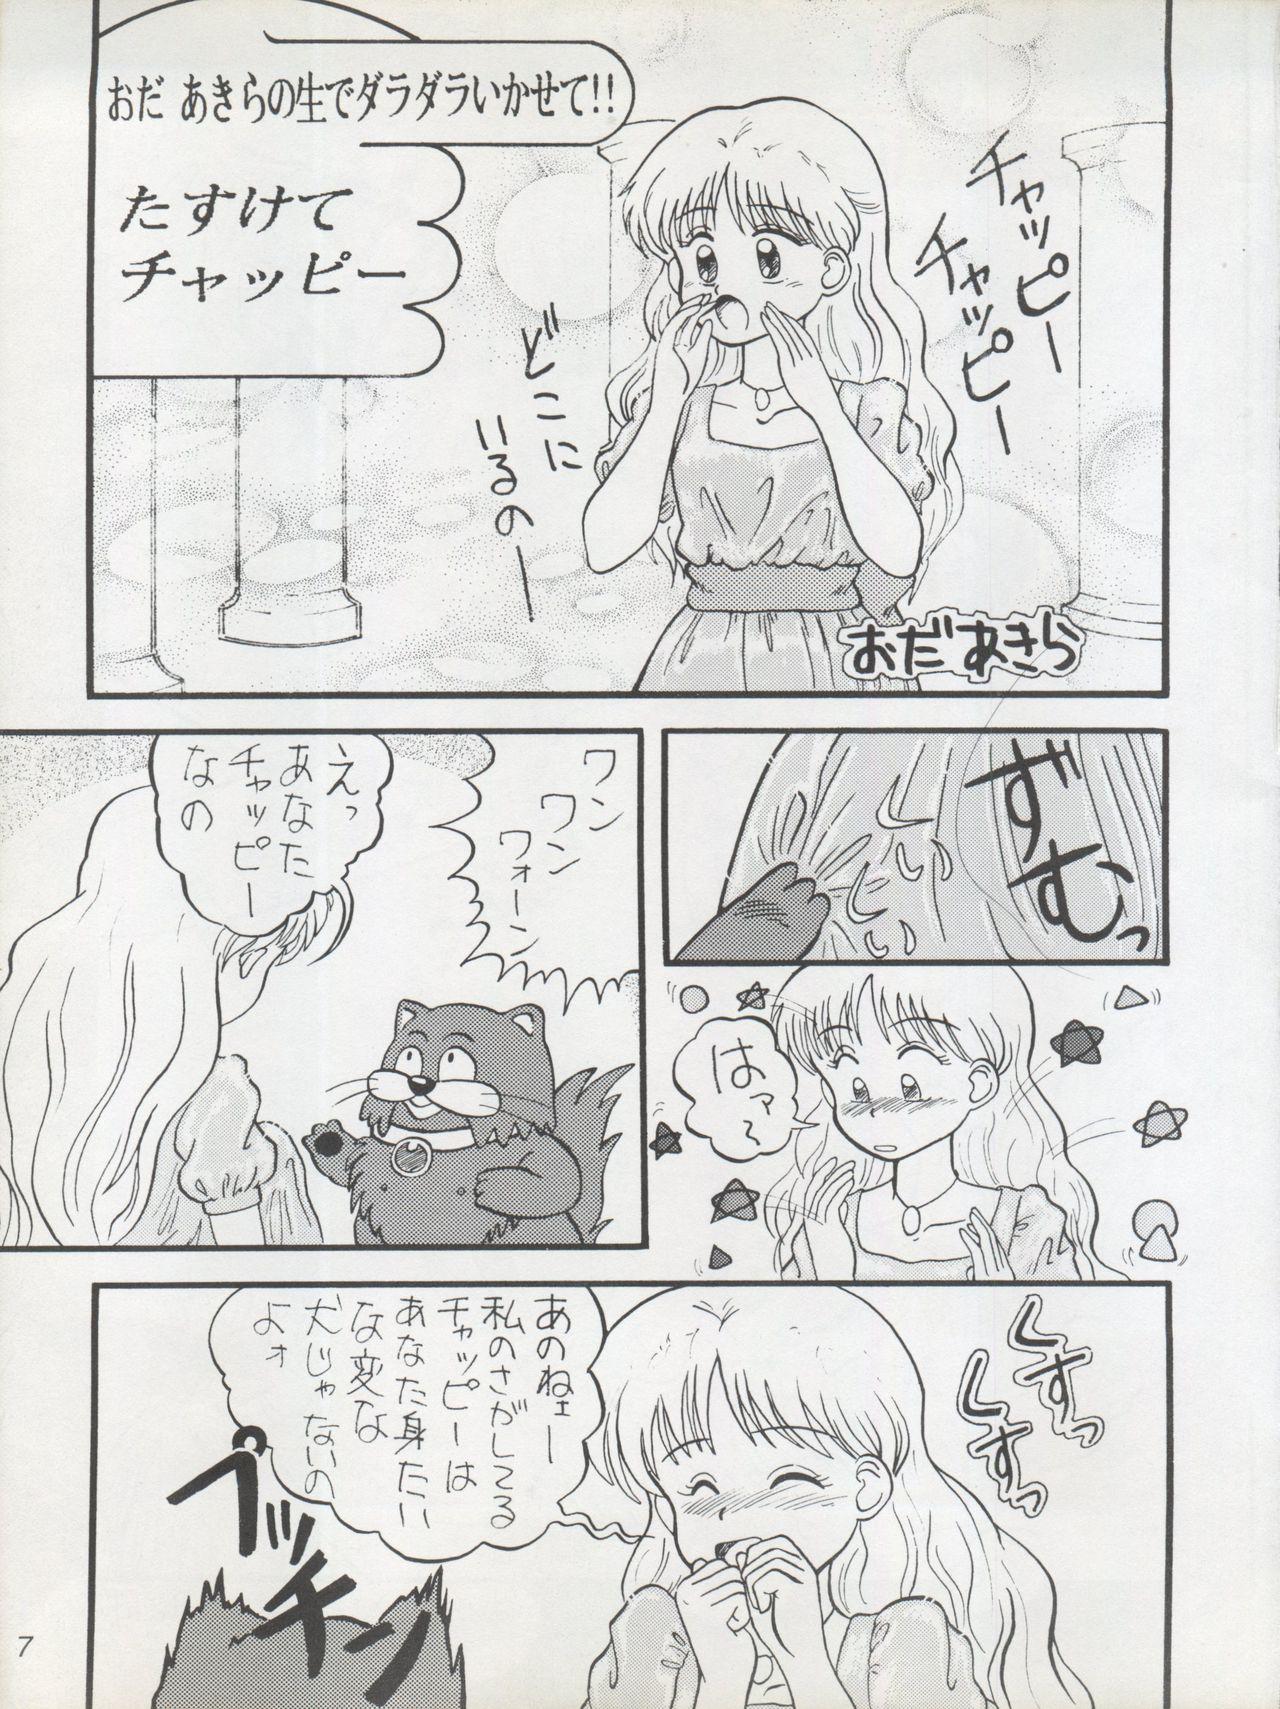 4some MAGICAL RIBBON SPECIAL - Hime chans ribbon Atm - Page 7